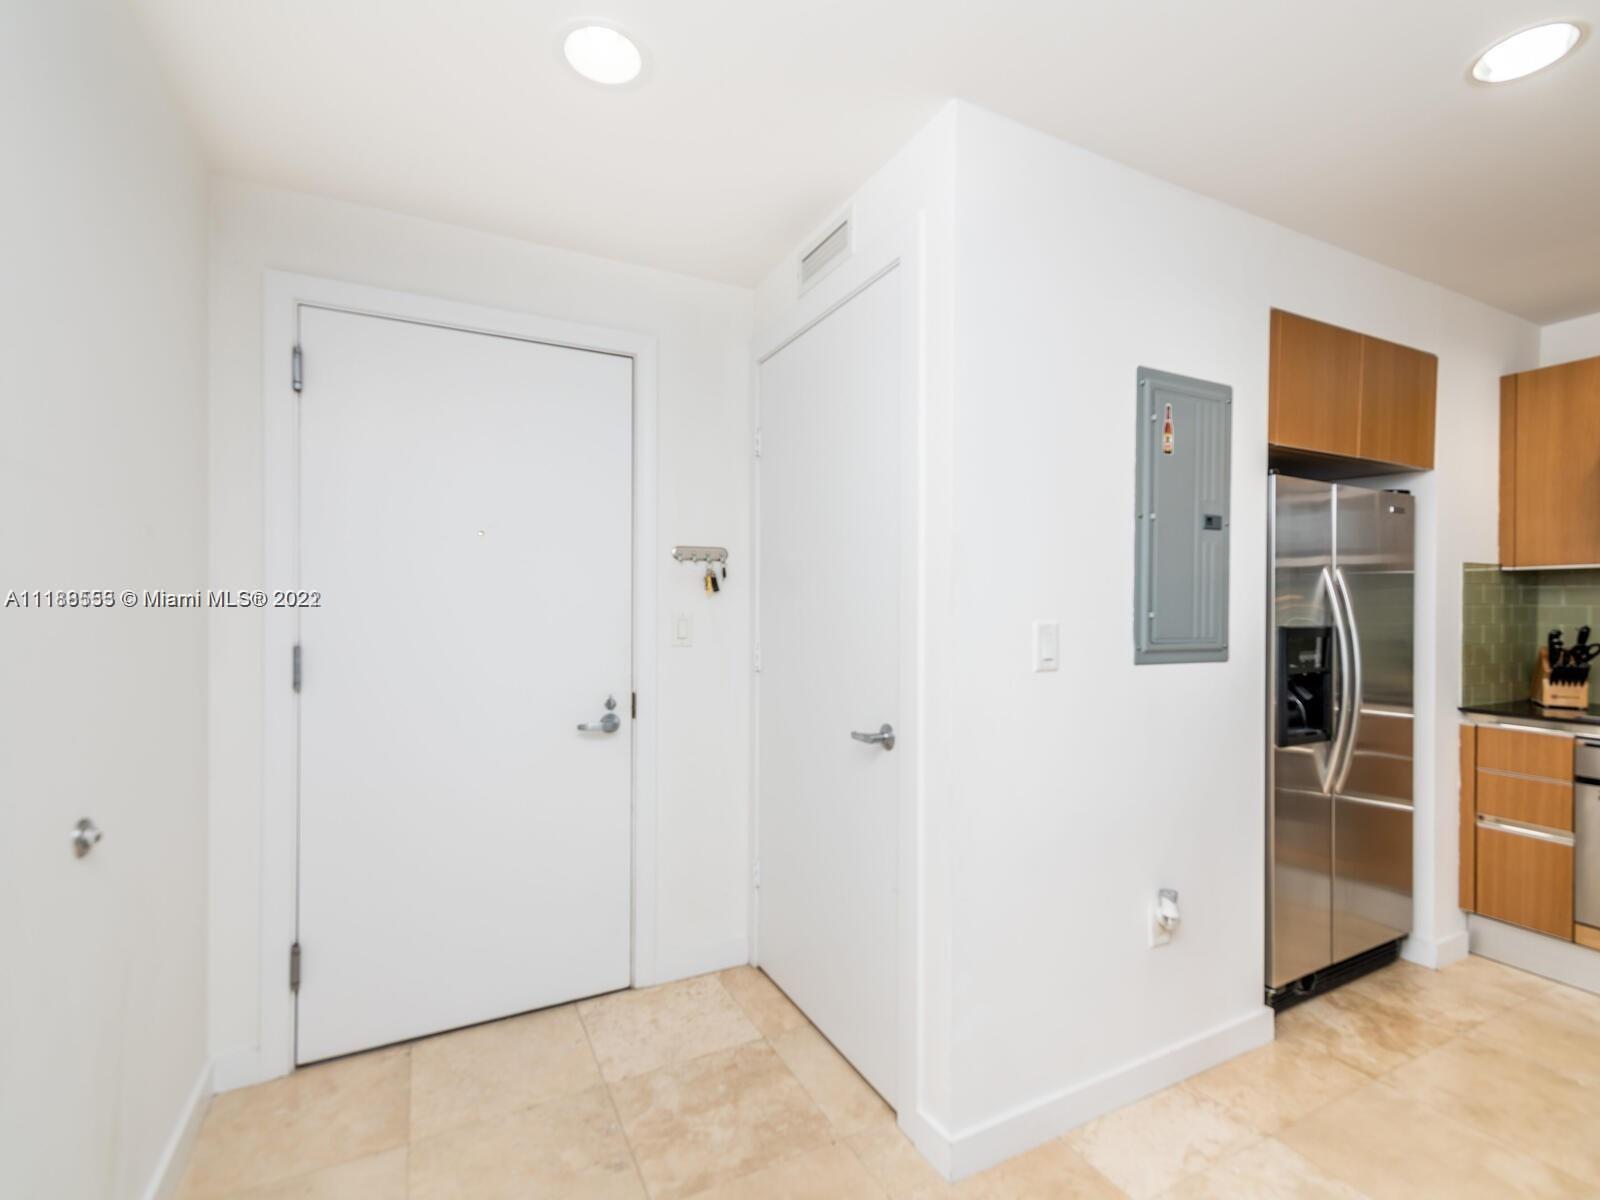 Beautiful 1 bed 1 bath unit facing East with gorgeous City and water views! in the best location of the Brickell Area. Unit features: marble floors throughout; windows treatment, stainless steel appliances and granite countertops on kitchen; washer and dryer inside the unit, 1 assigned parking space. Building offers great amenities and is walking distance from many restaurants, supermarkets, Mary Brickell Village; Miami Brickell City Center, people mover and metro rail stations. Basic Cable & water included.